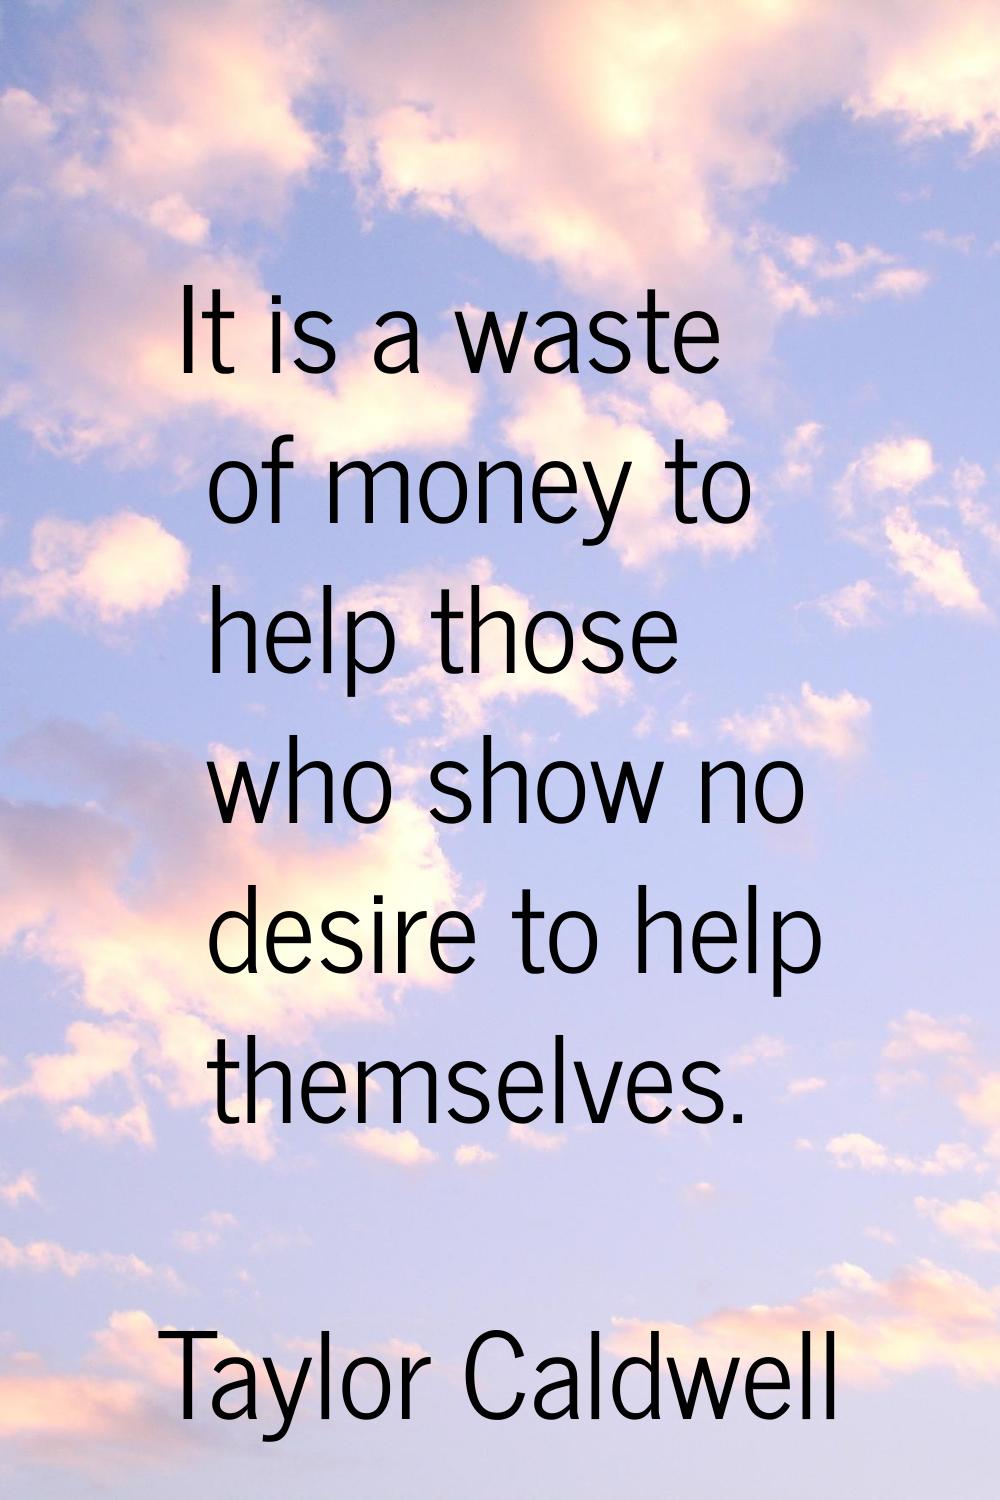 It is a waste of money to help those who show no desire to help themselves.